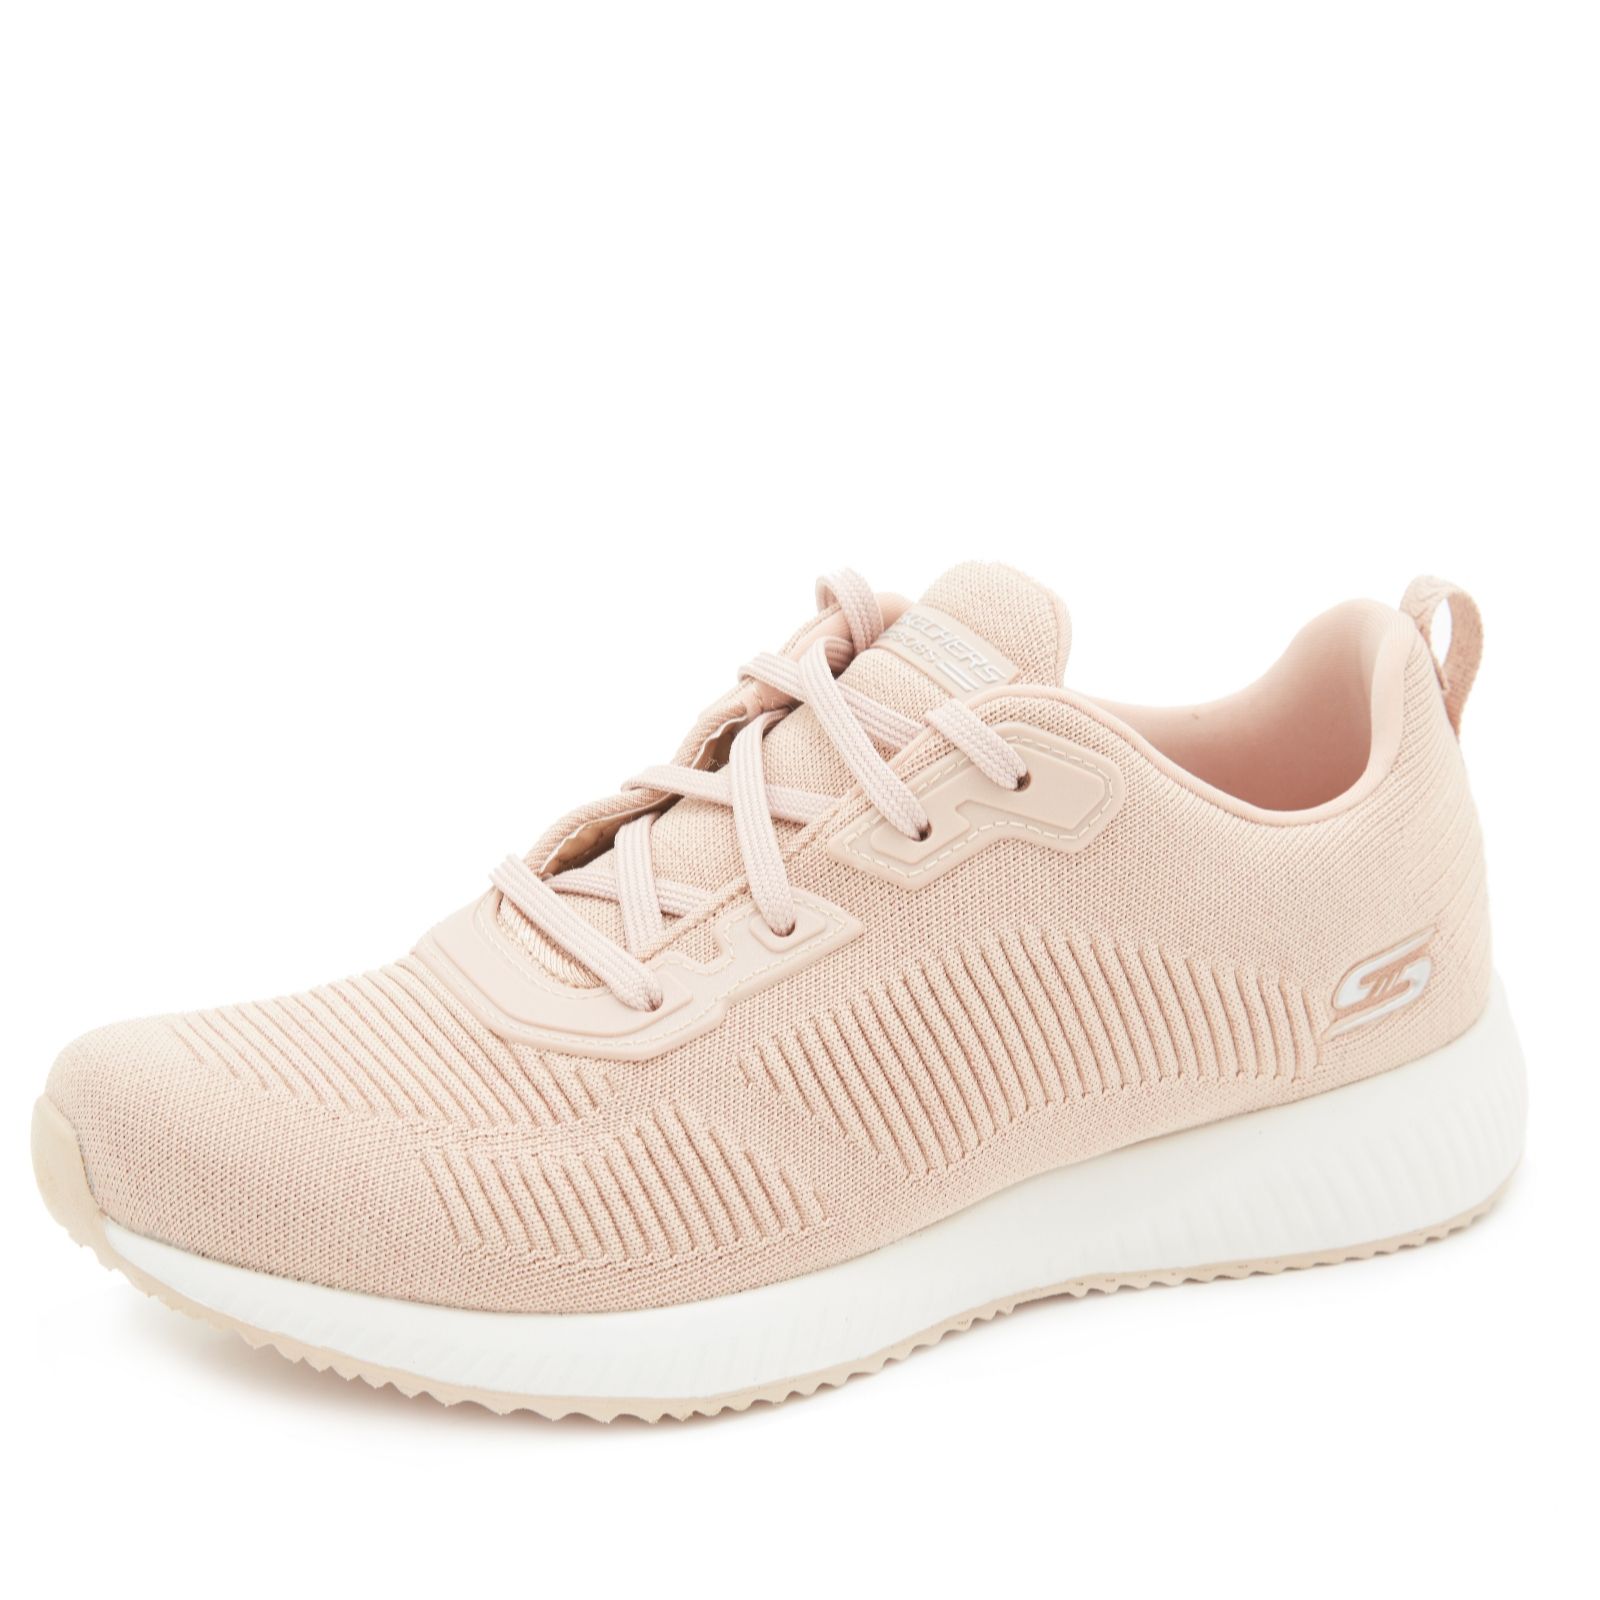 Skechers Bobs Squad Total Glam Lace Up Trainer - QVC UK